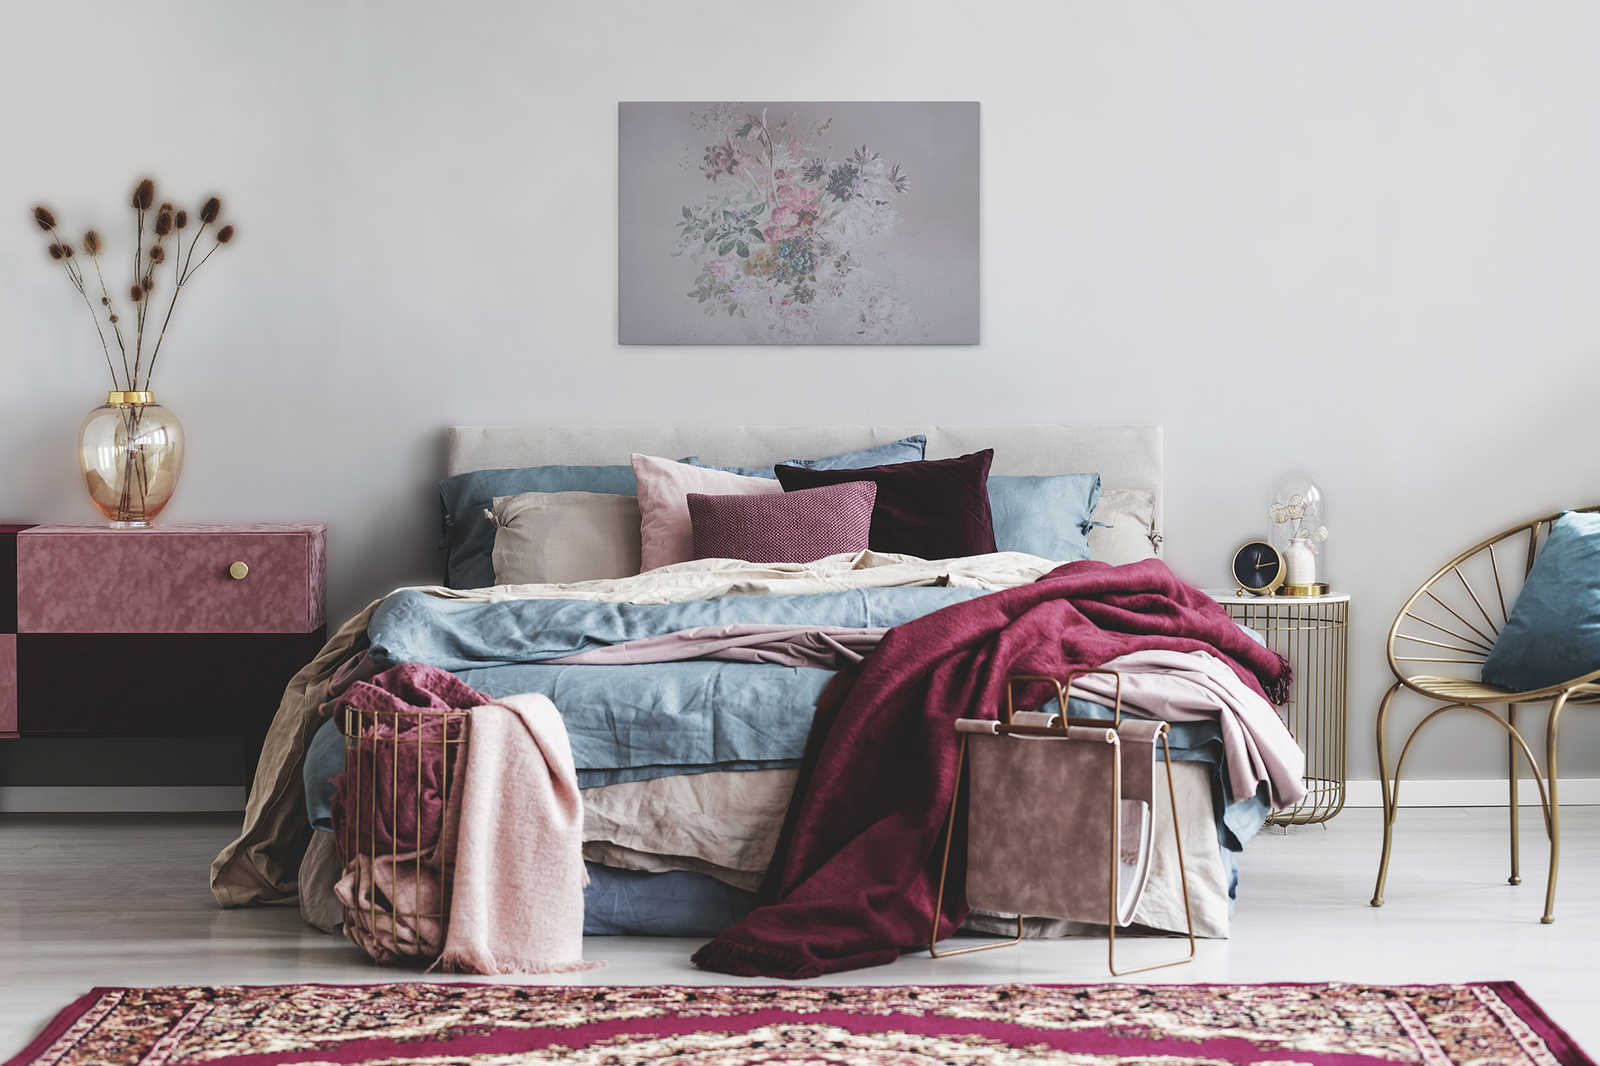             Flowers canvas picture with pastel design | pink, grey - 0.90 m x 0.60 m
        